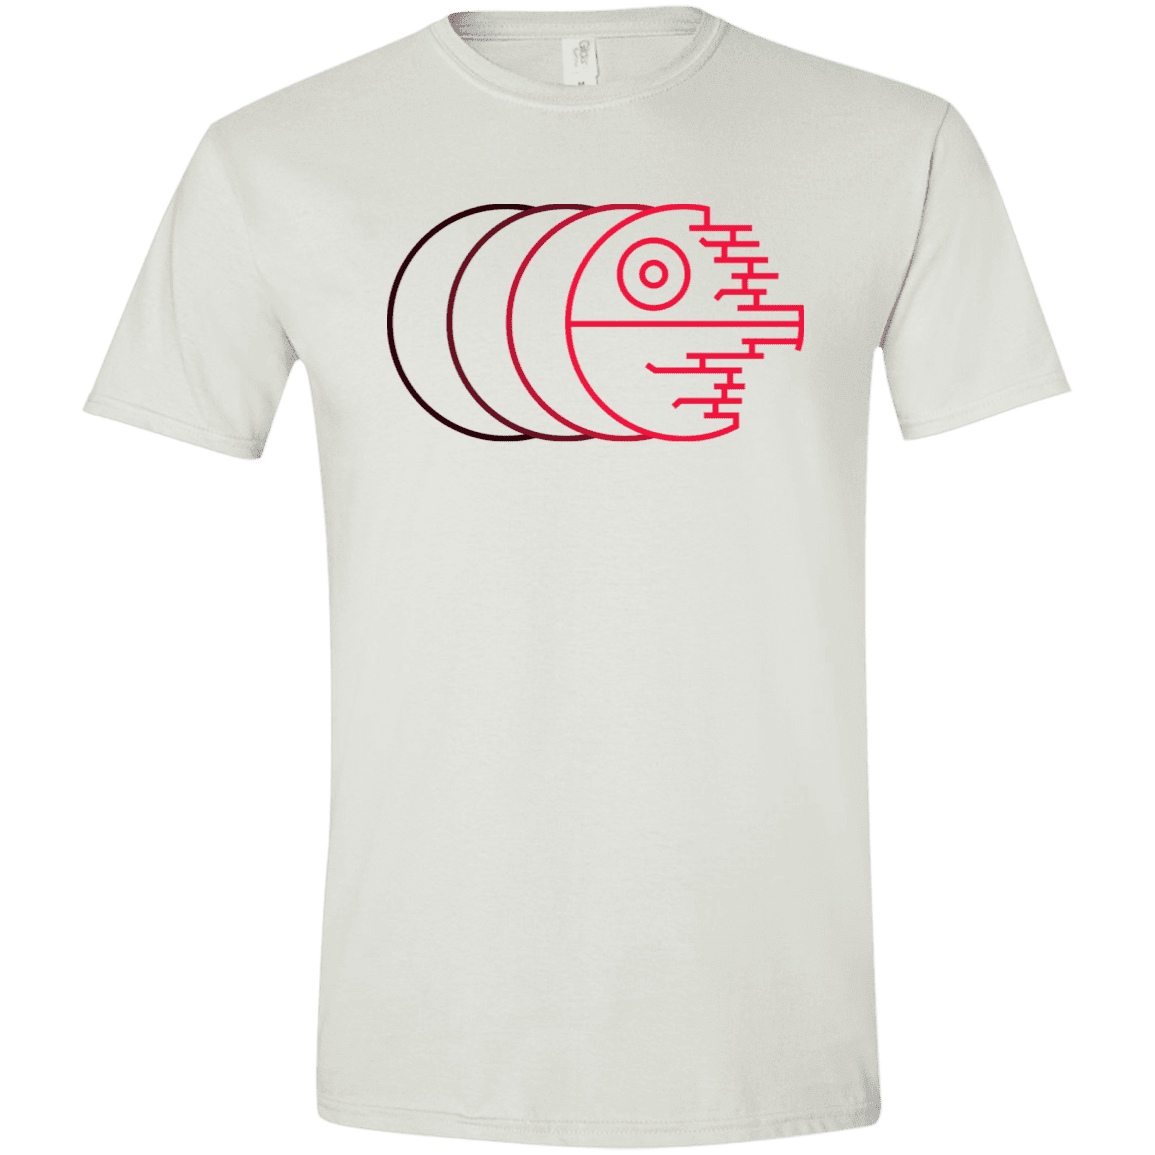 T-Shirts White / X-Small Fully Operational Men's Semi-Fitted Softstyle